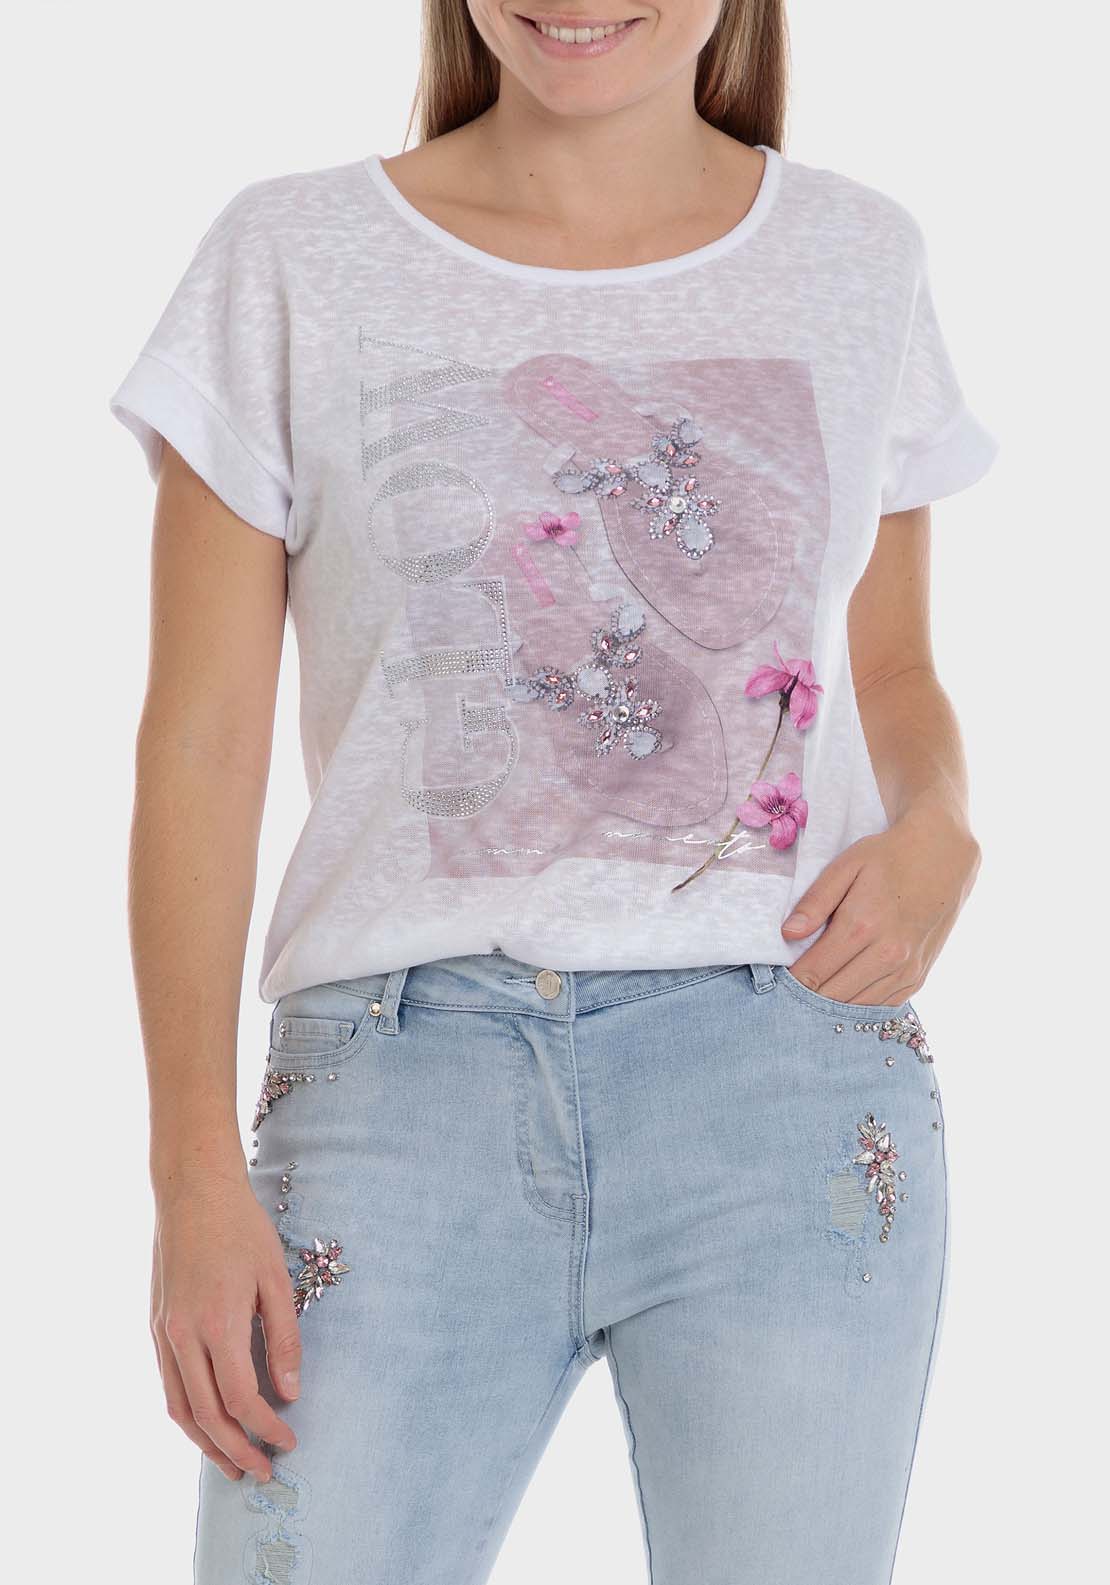 Punt Roma Printed T-Shirt With Gemstones 1 Shaws Department Stores